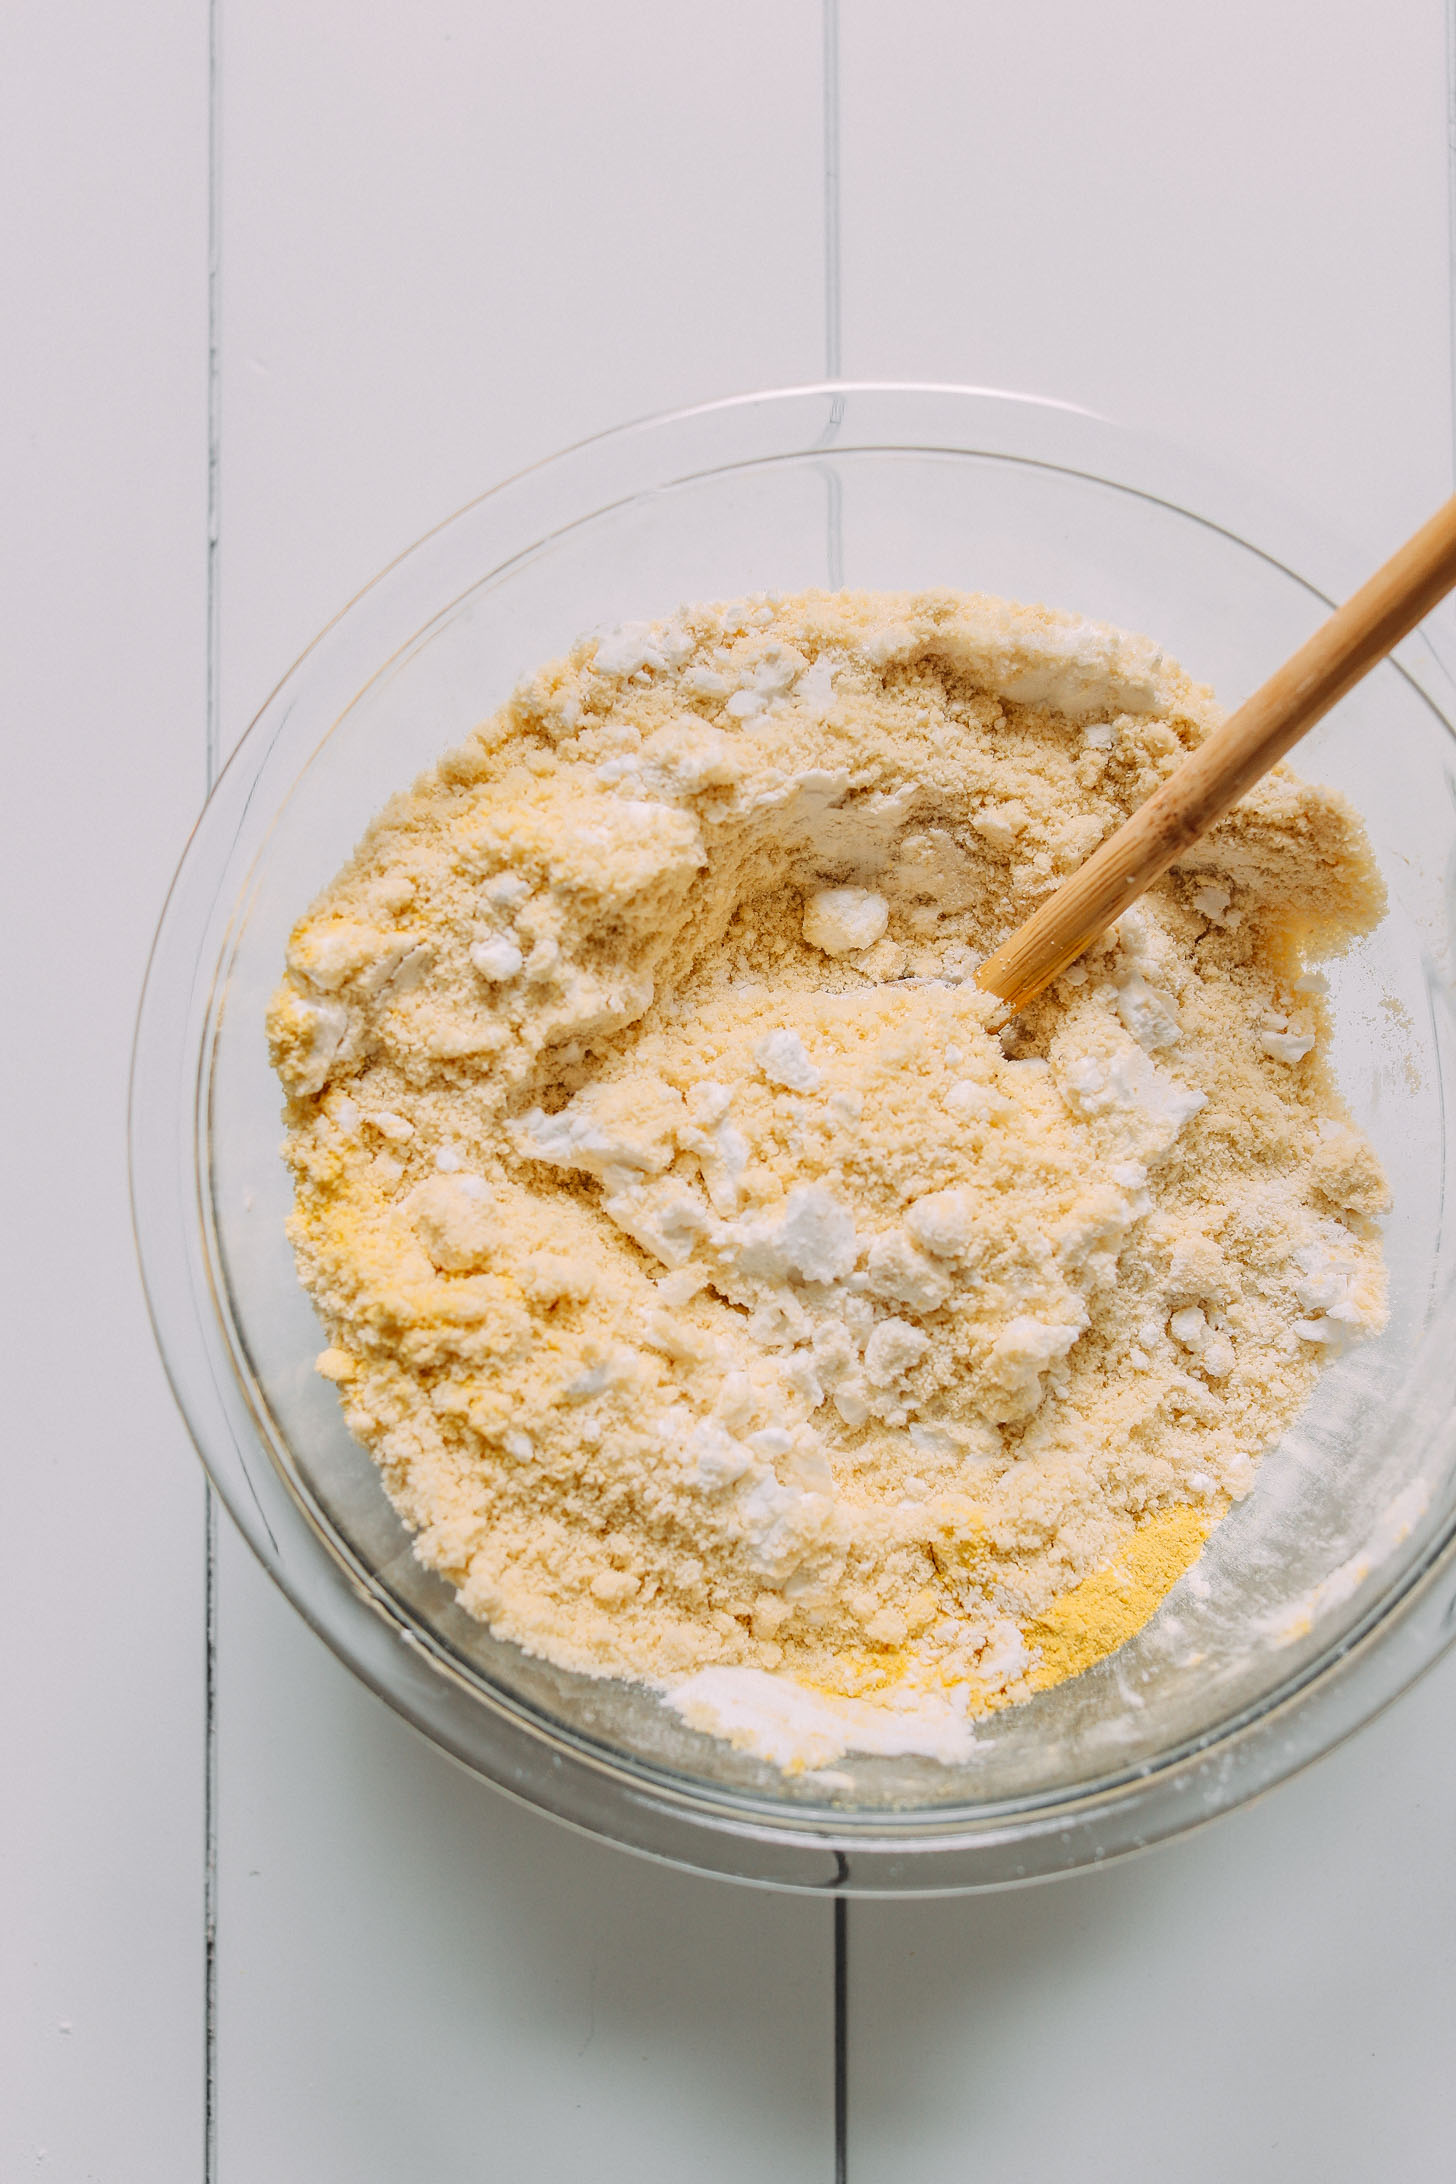 Mixing dry ingredients for our Vegan Gluten-Free Biscuits recipe